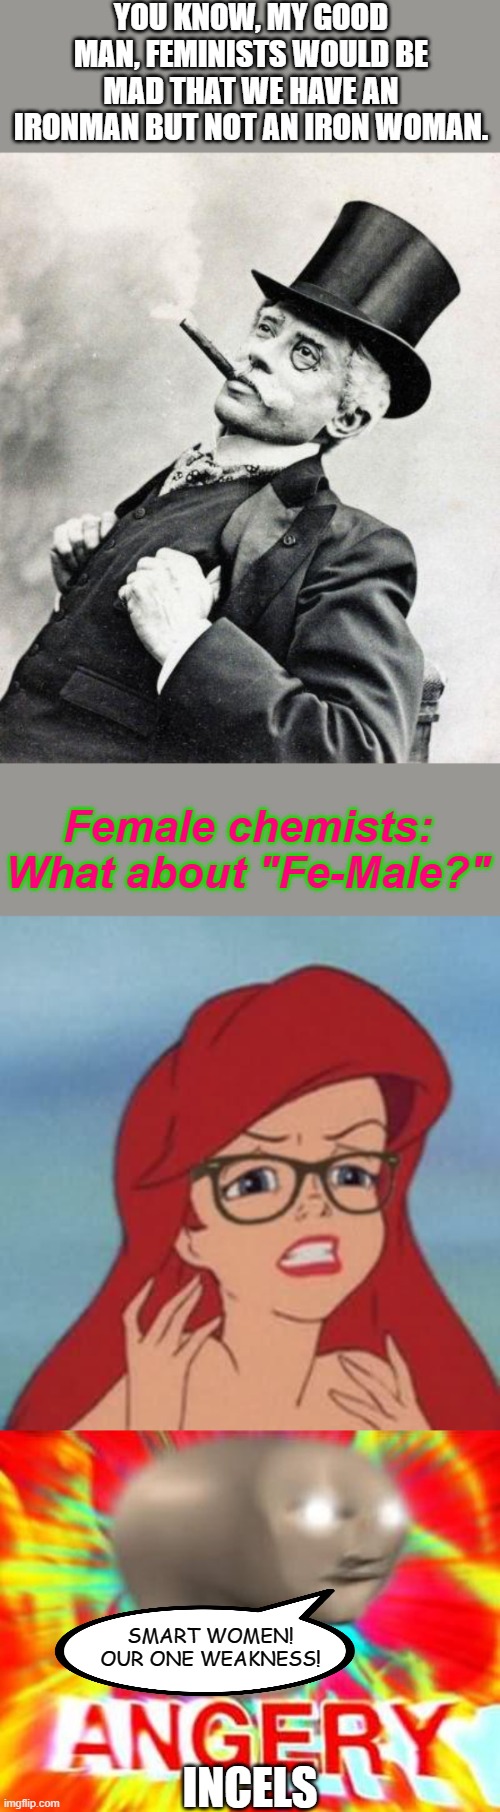 No one expects the smart woman. | YOU KNOW, MY GOOD MAN, FEMINISTS WOULD BE MAD THAT WE HAVE AN IRONMAN BUT NOT AN IRON WOMAN. Female chemists: What about "Fe-Male?"; SMART WOMEN! OUR ONE WEAKNESS! INCELS | image tagged in smug gentleman,hipster ariel,surreal angery,feminist,incel,feminazi | made w/ Imgflip meme maker